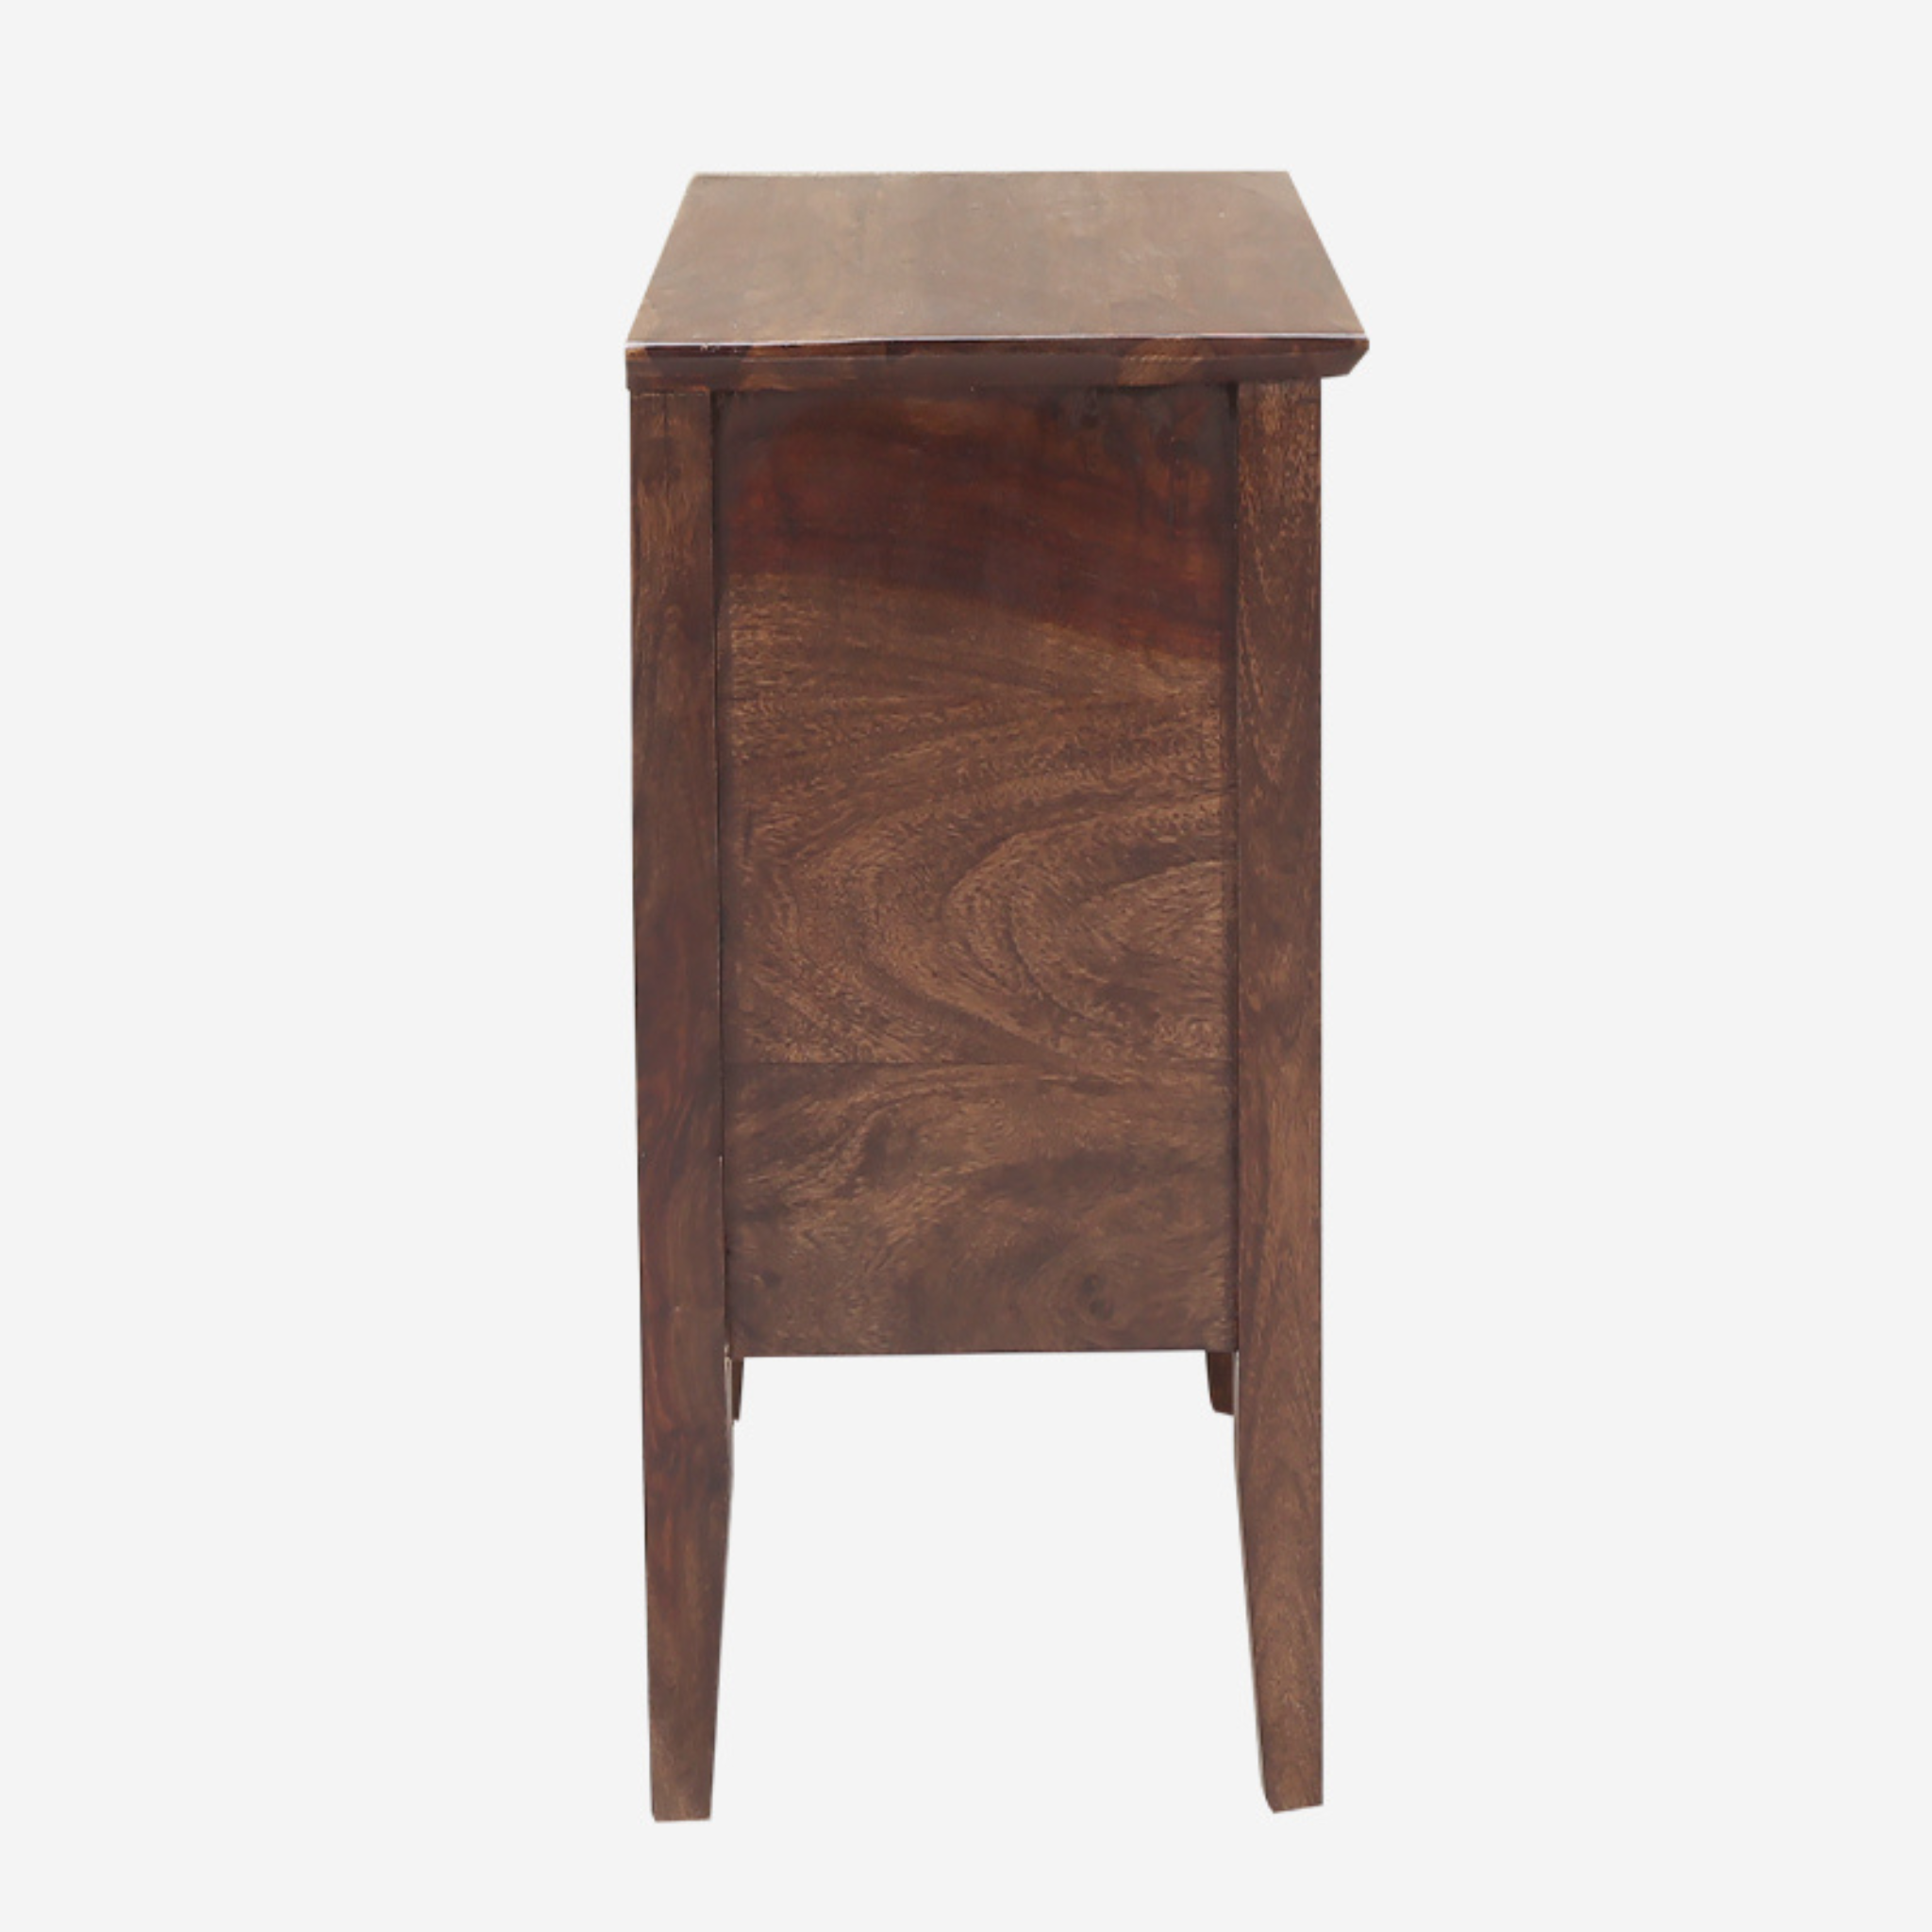 Illinois Bedside Table with 2 Drawer